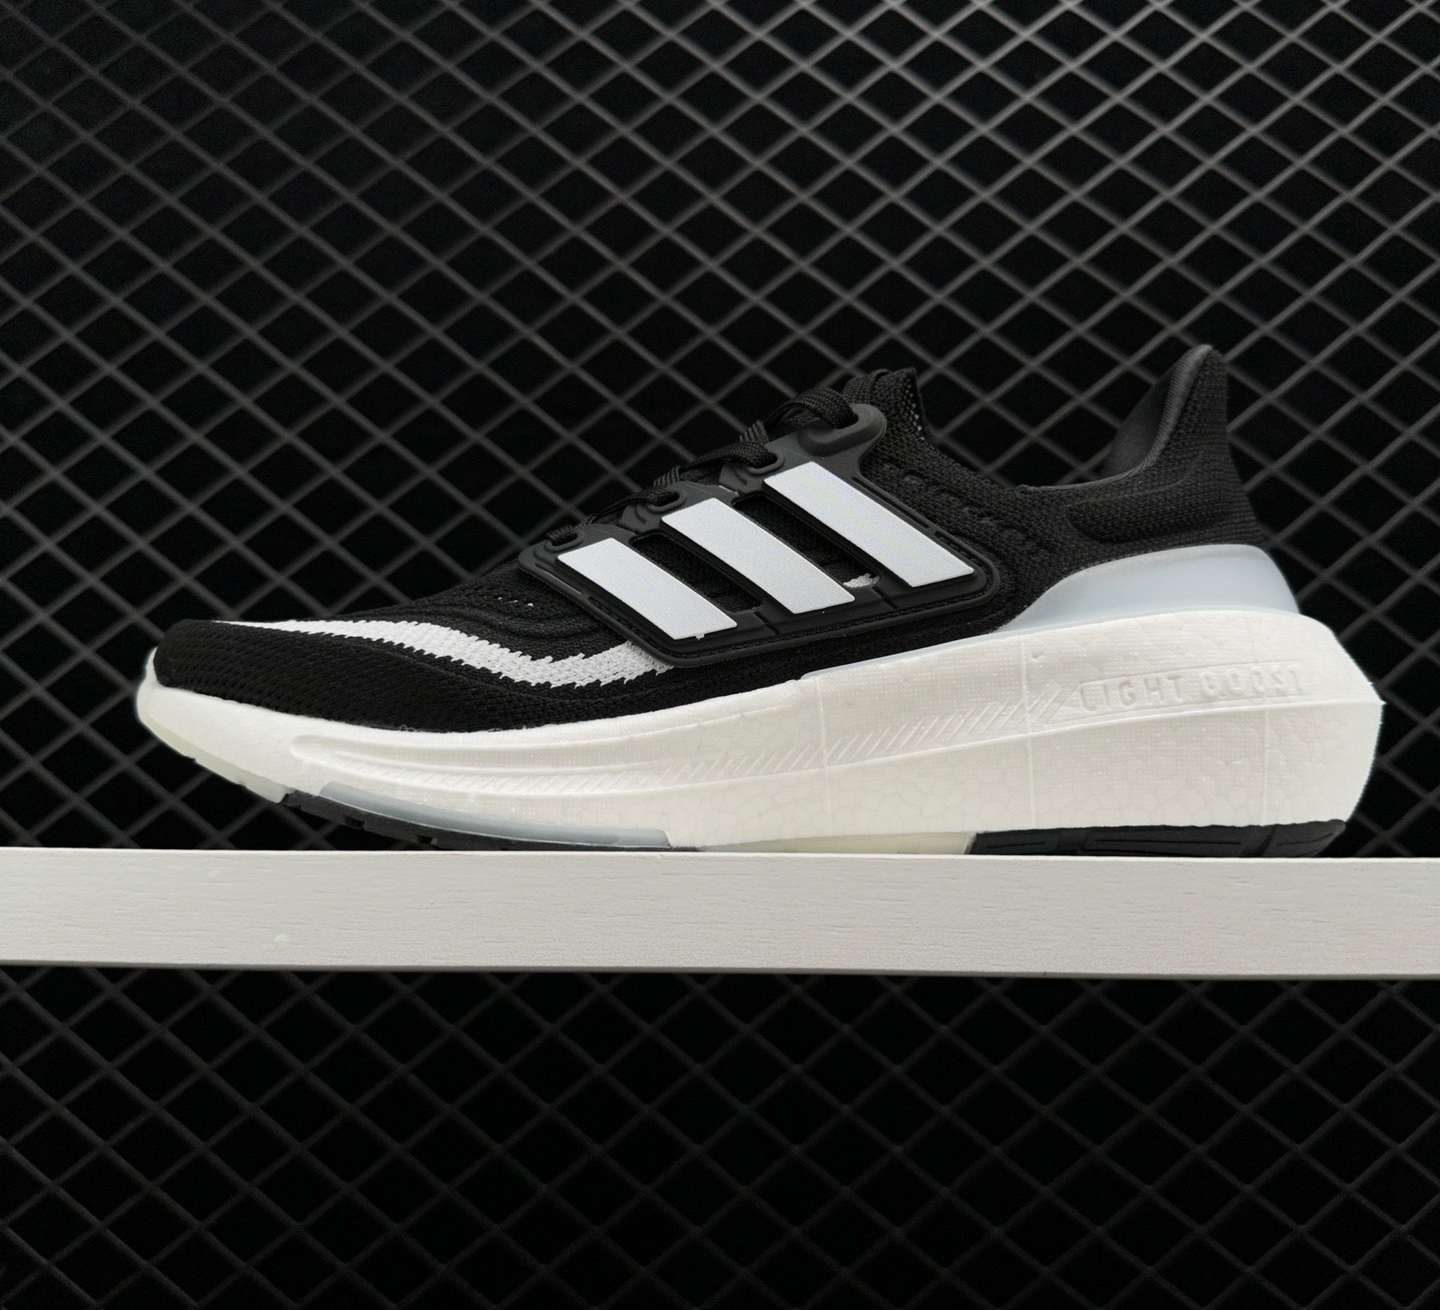 Adidas UltraBoost Light Running Shoes 'Core Black White' - Performance and Style in One